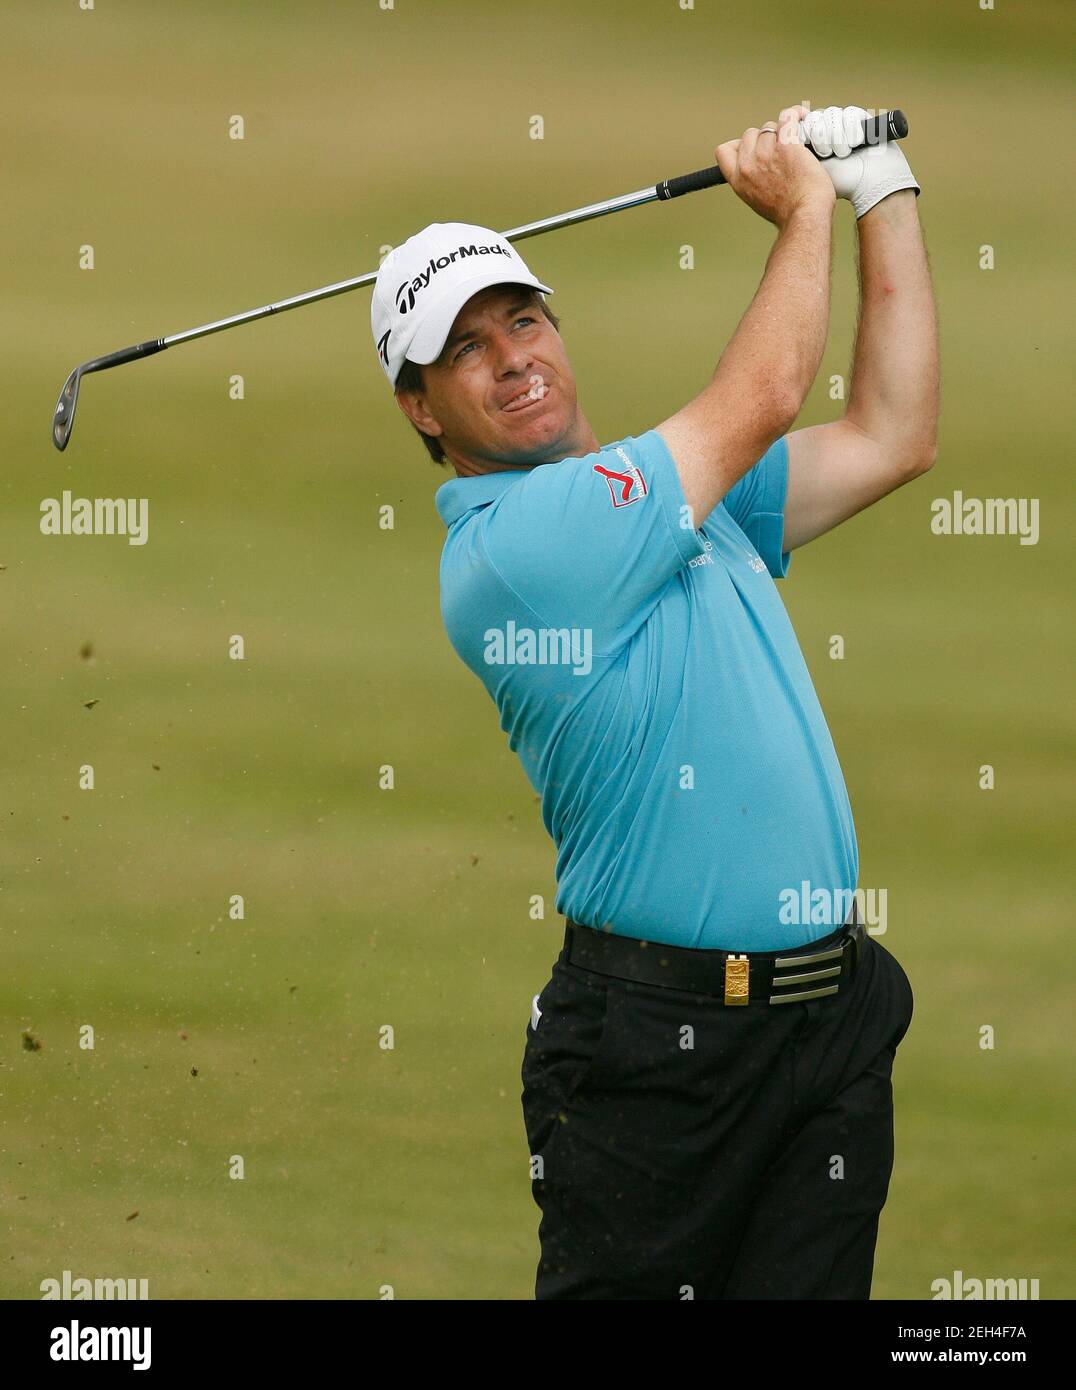 Golf - Open de France - Le Golf National - Paris - France - 27/6/08 Miles  Tunnicliff - England Mandatory Credit: Action Images / Paul Childs Stock  Photo - Alamy